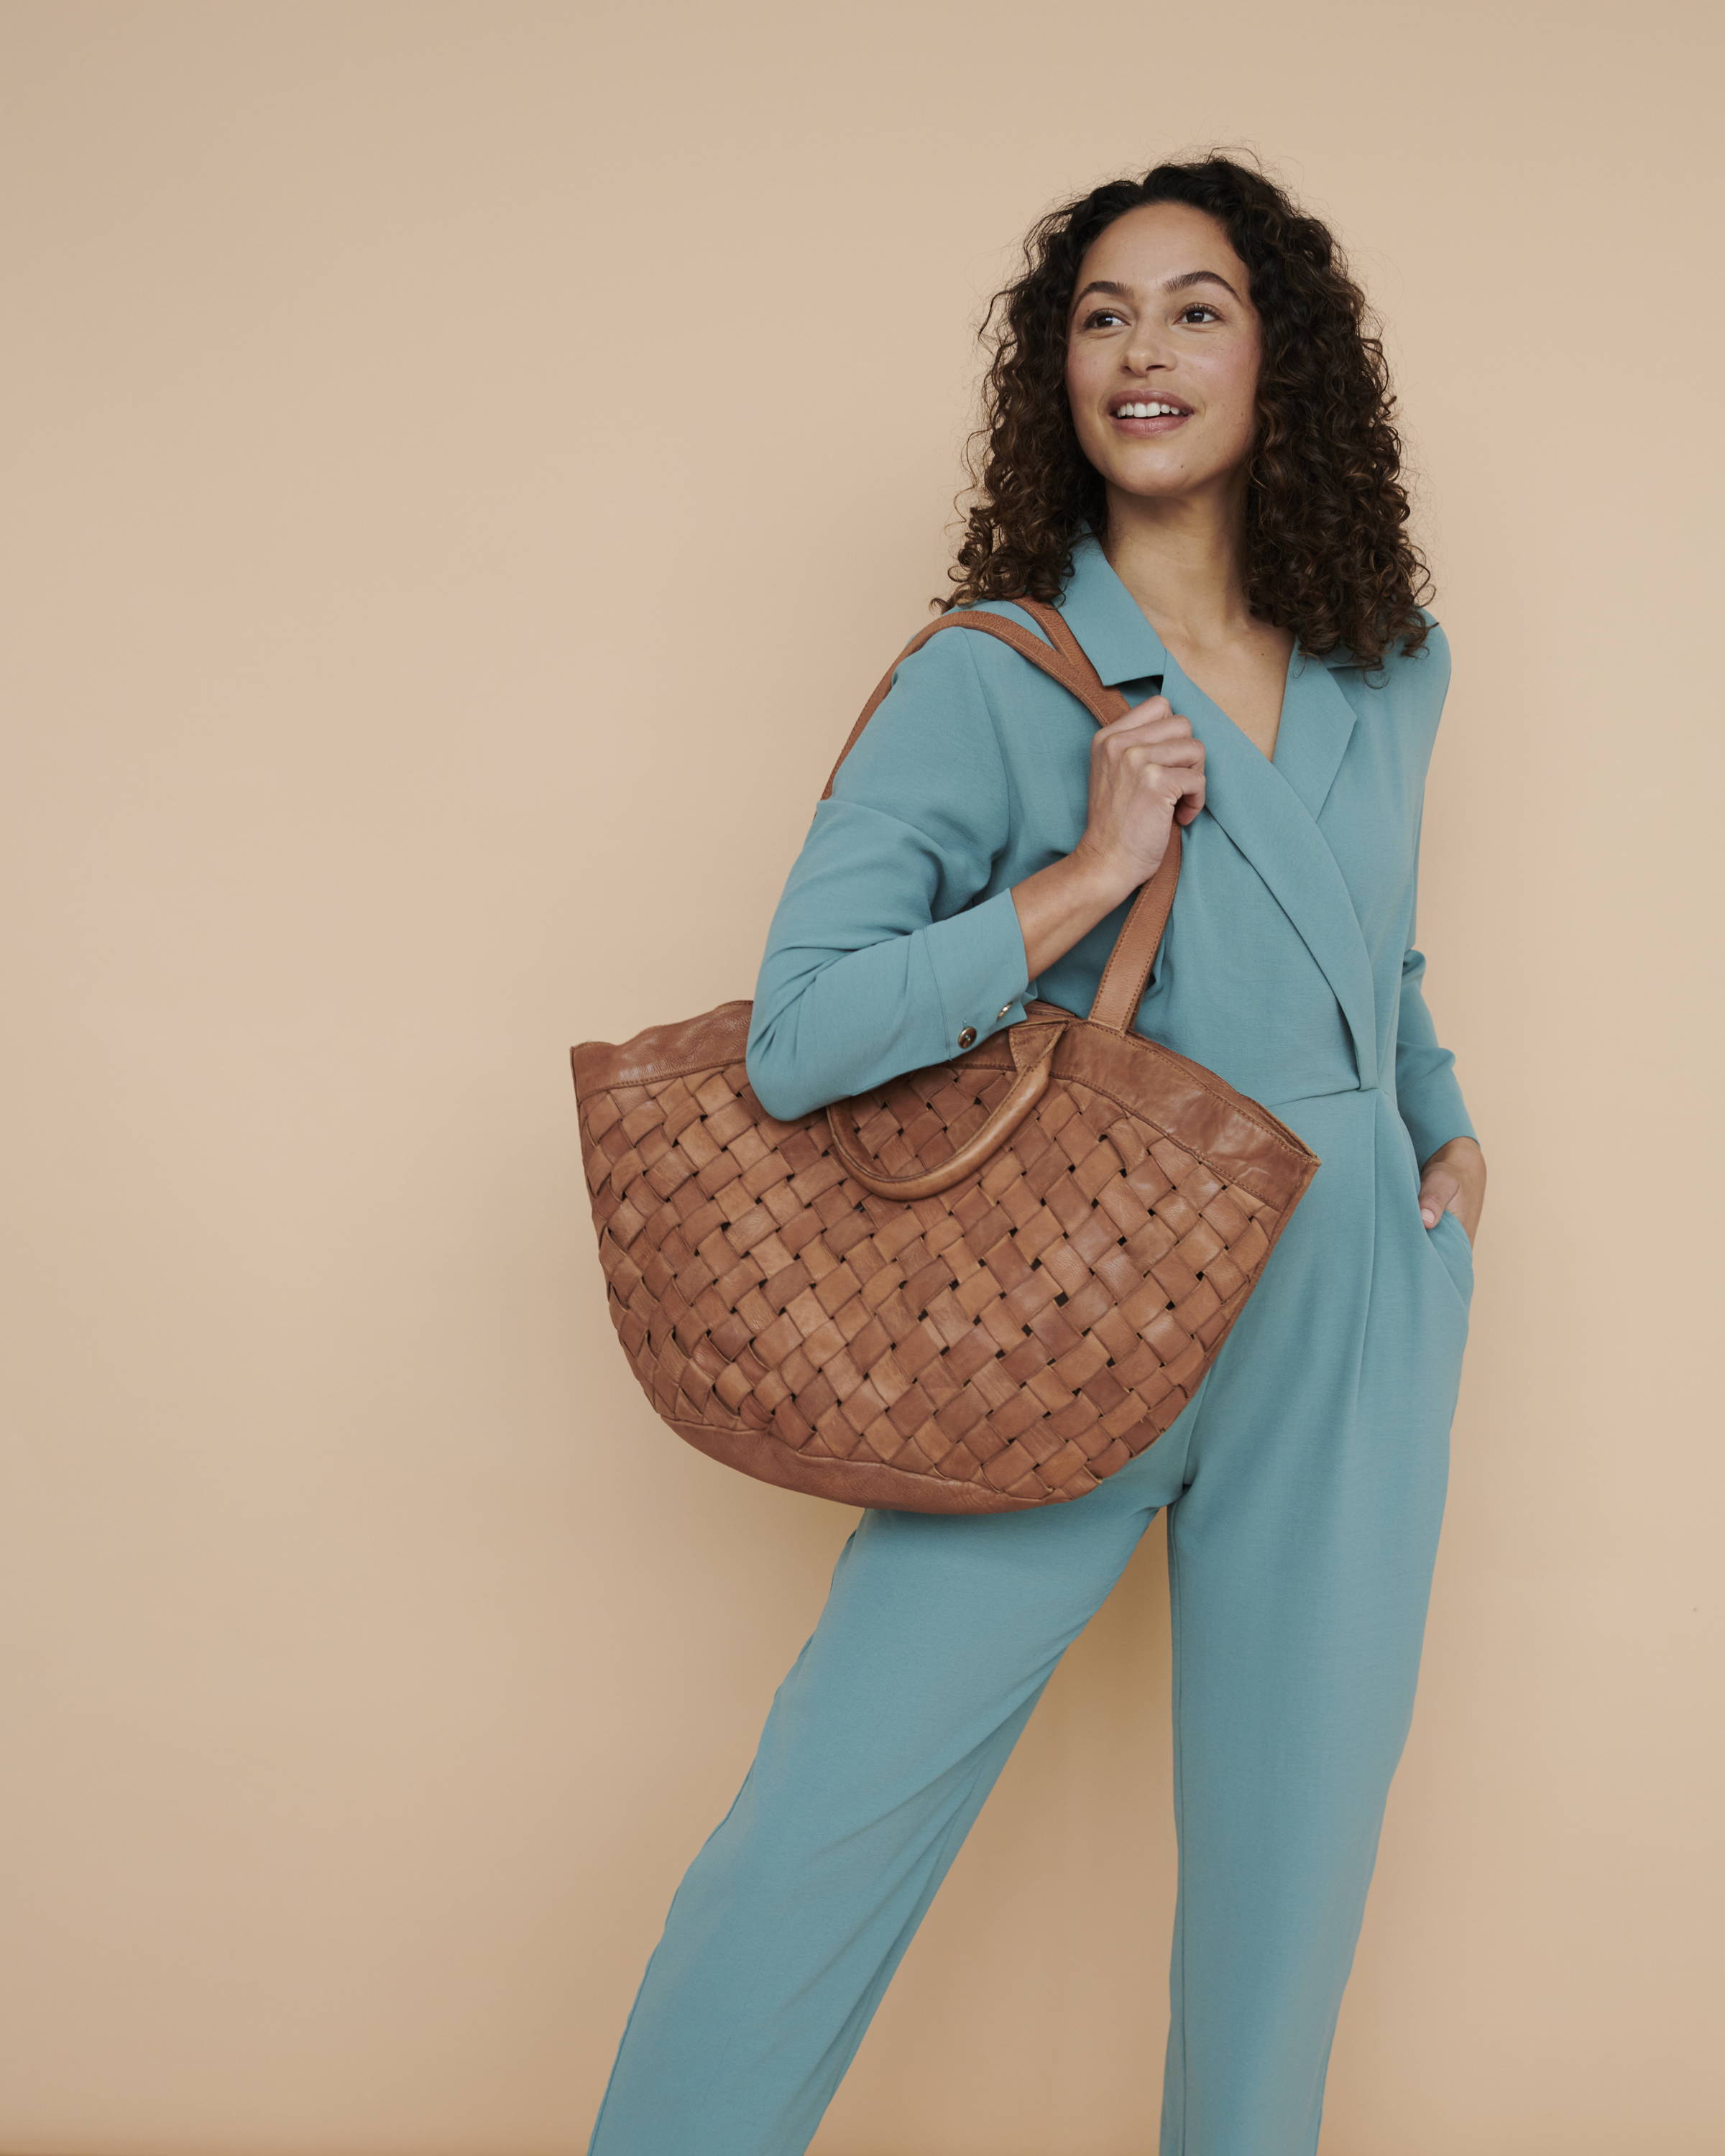 Mother's Day Gift Ideas 2022: Leather Handbags and Totes To Last